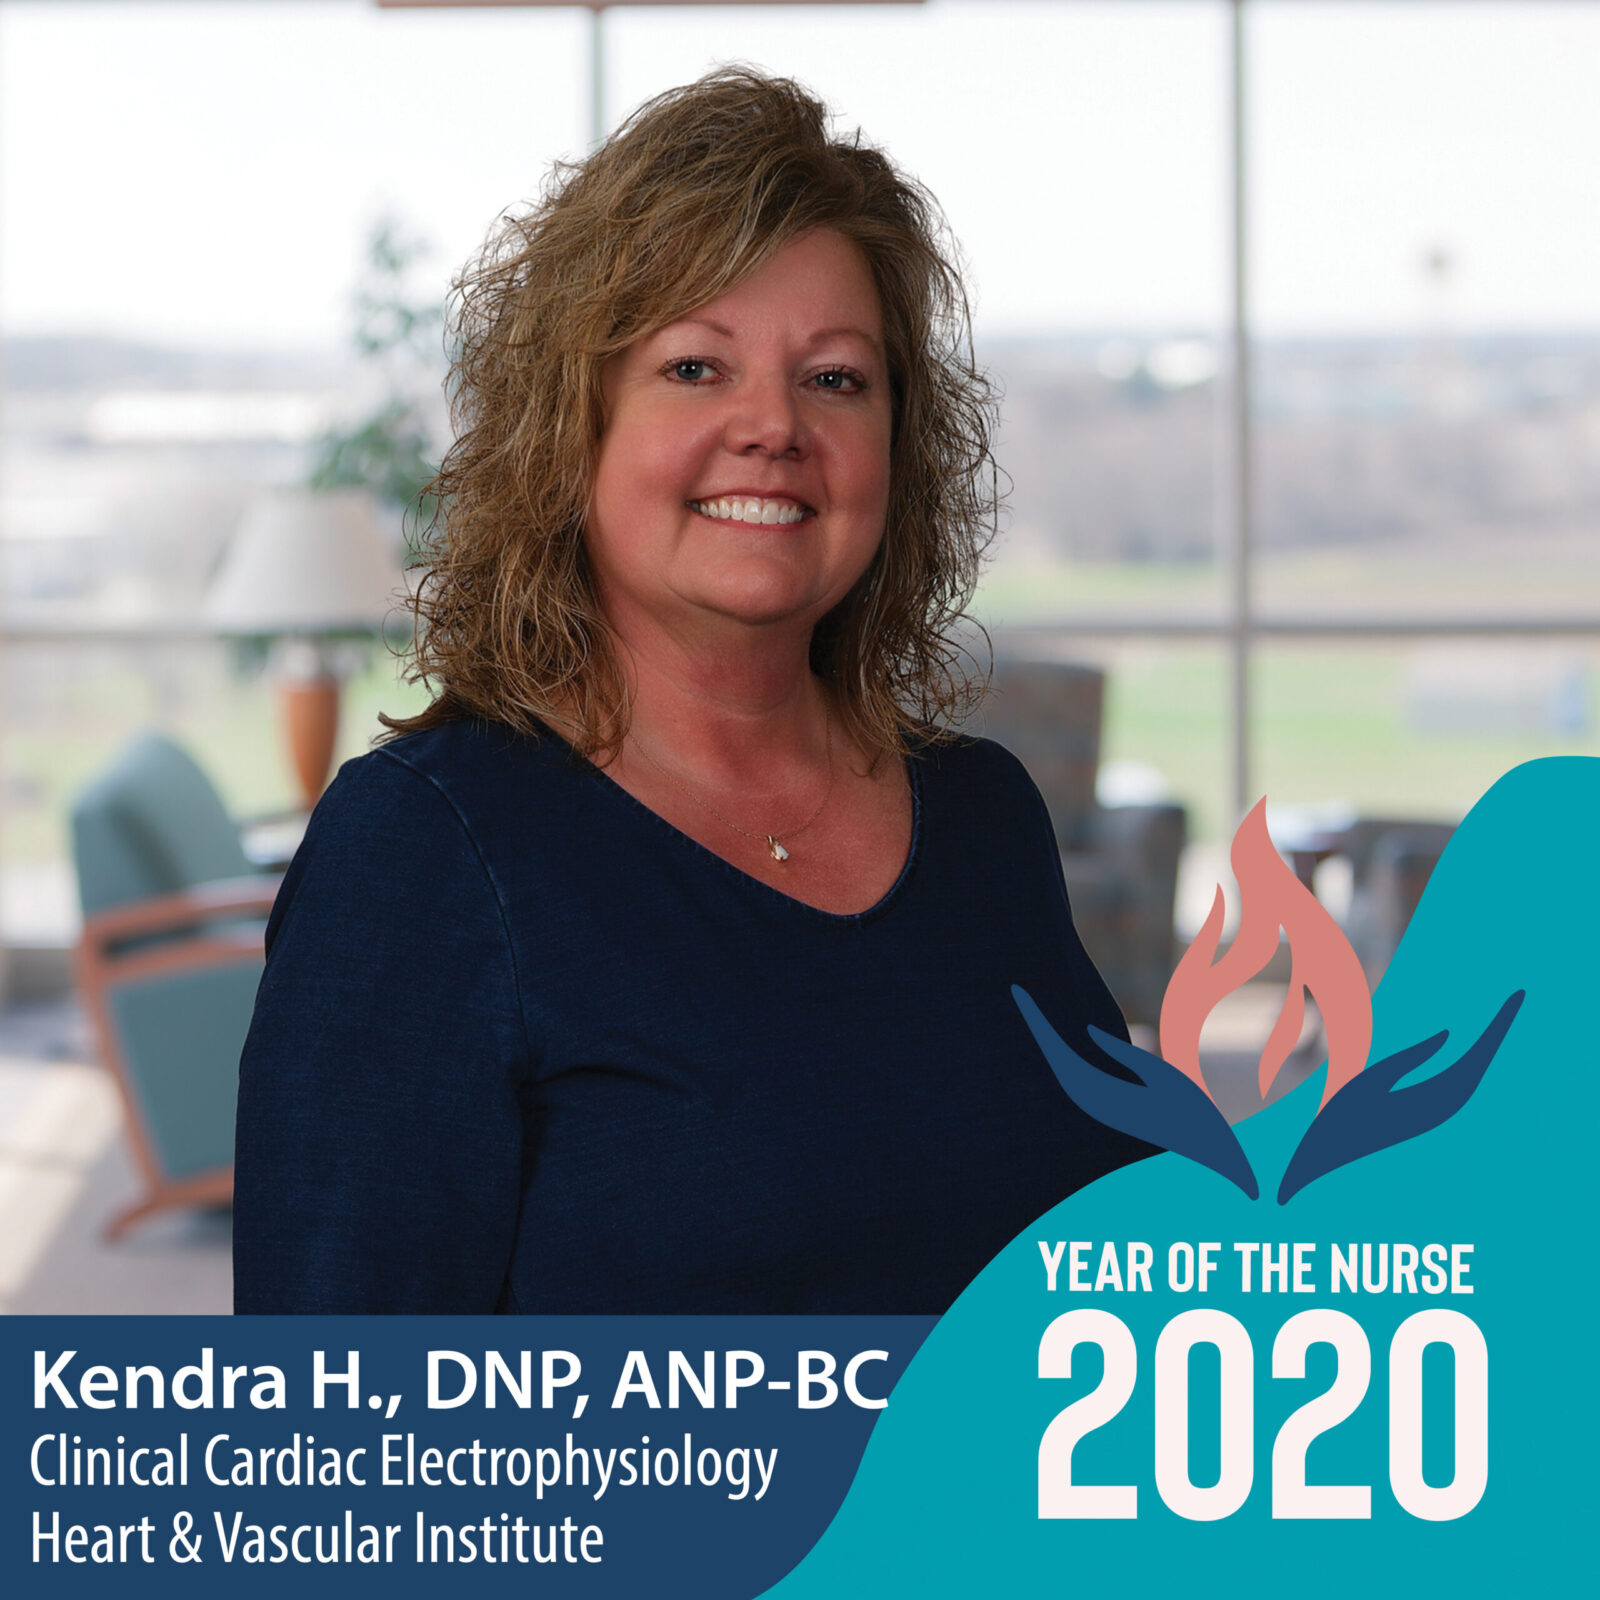 Year of the Nurse Nominee: Kendra H., DNP, ANP-BC